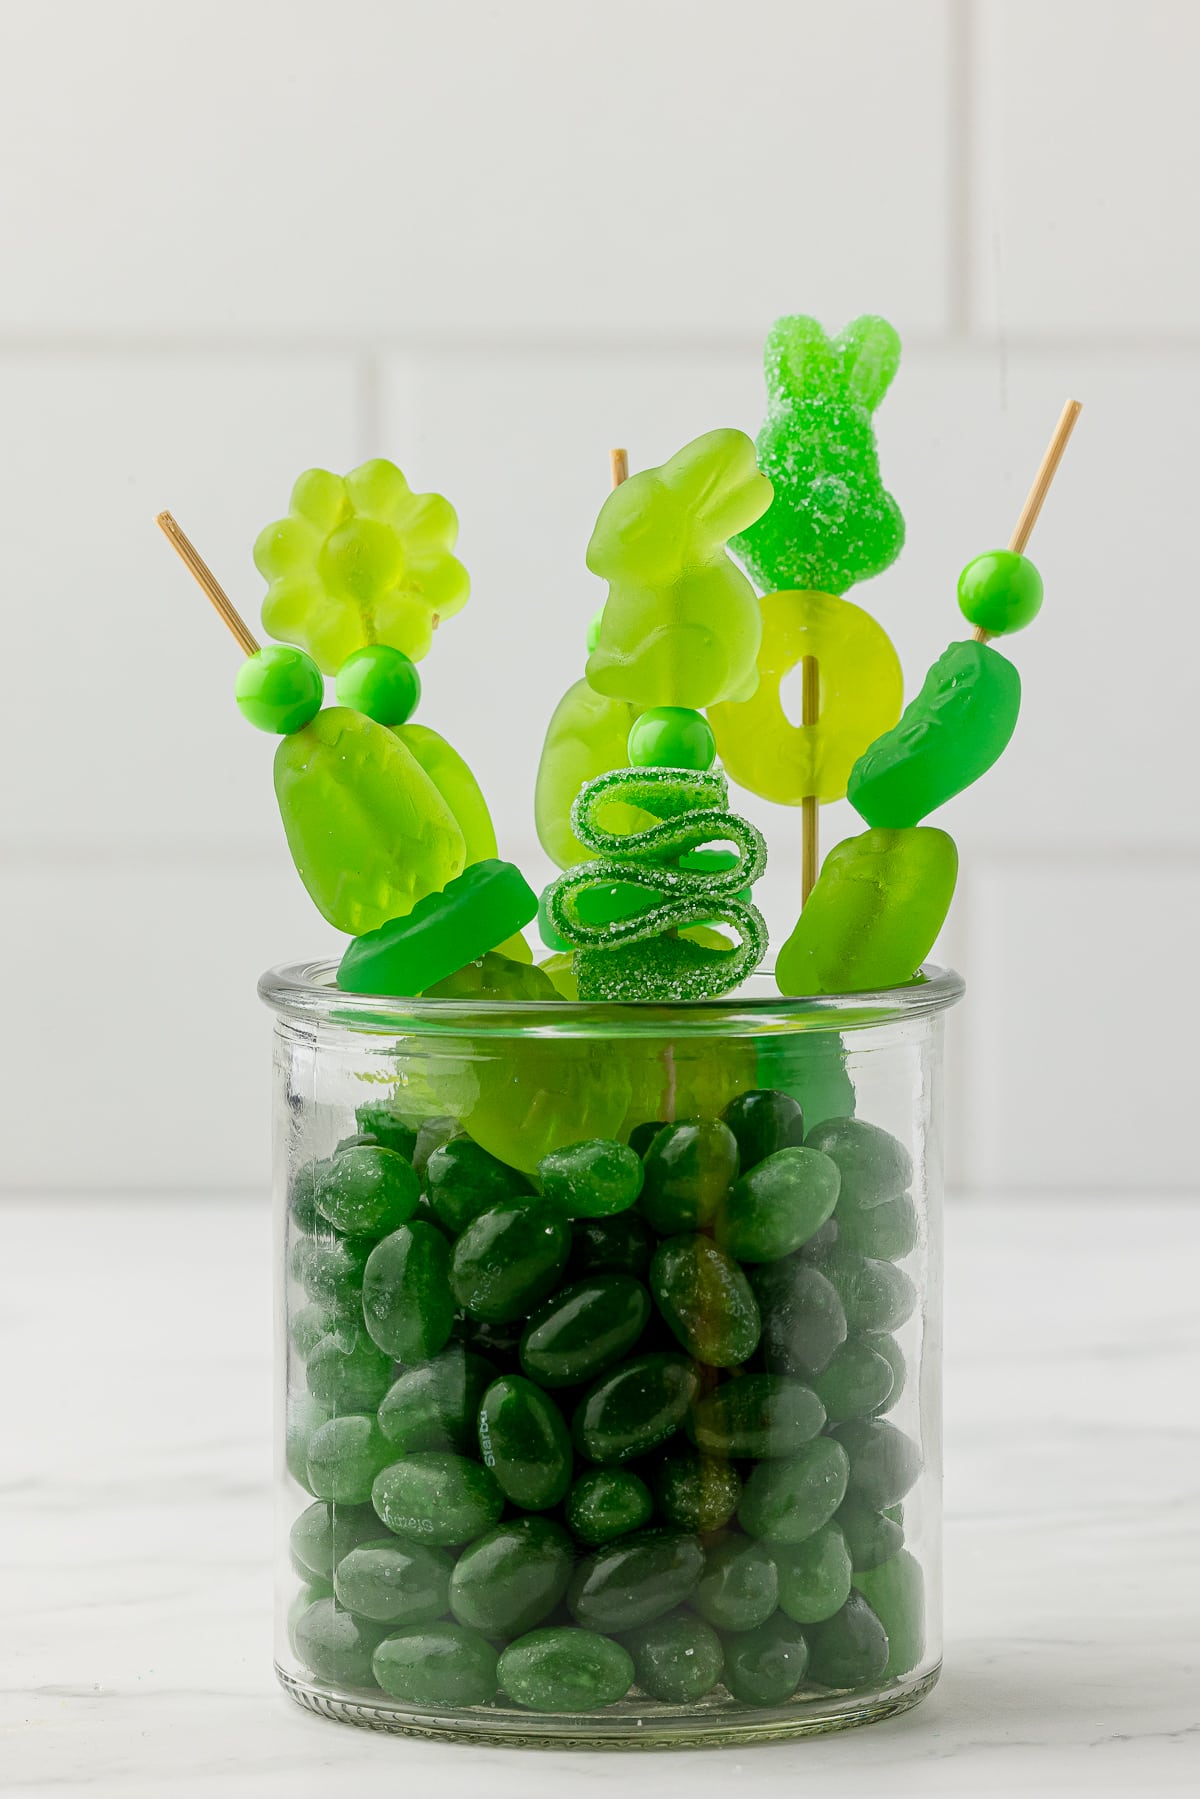 Green jelly beans in a small jar with green candy kabobs made with green gummy candy bought at Five Below on a white countertop.